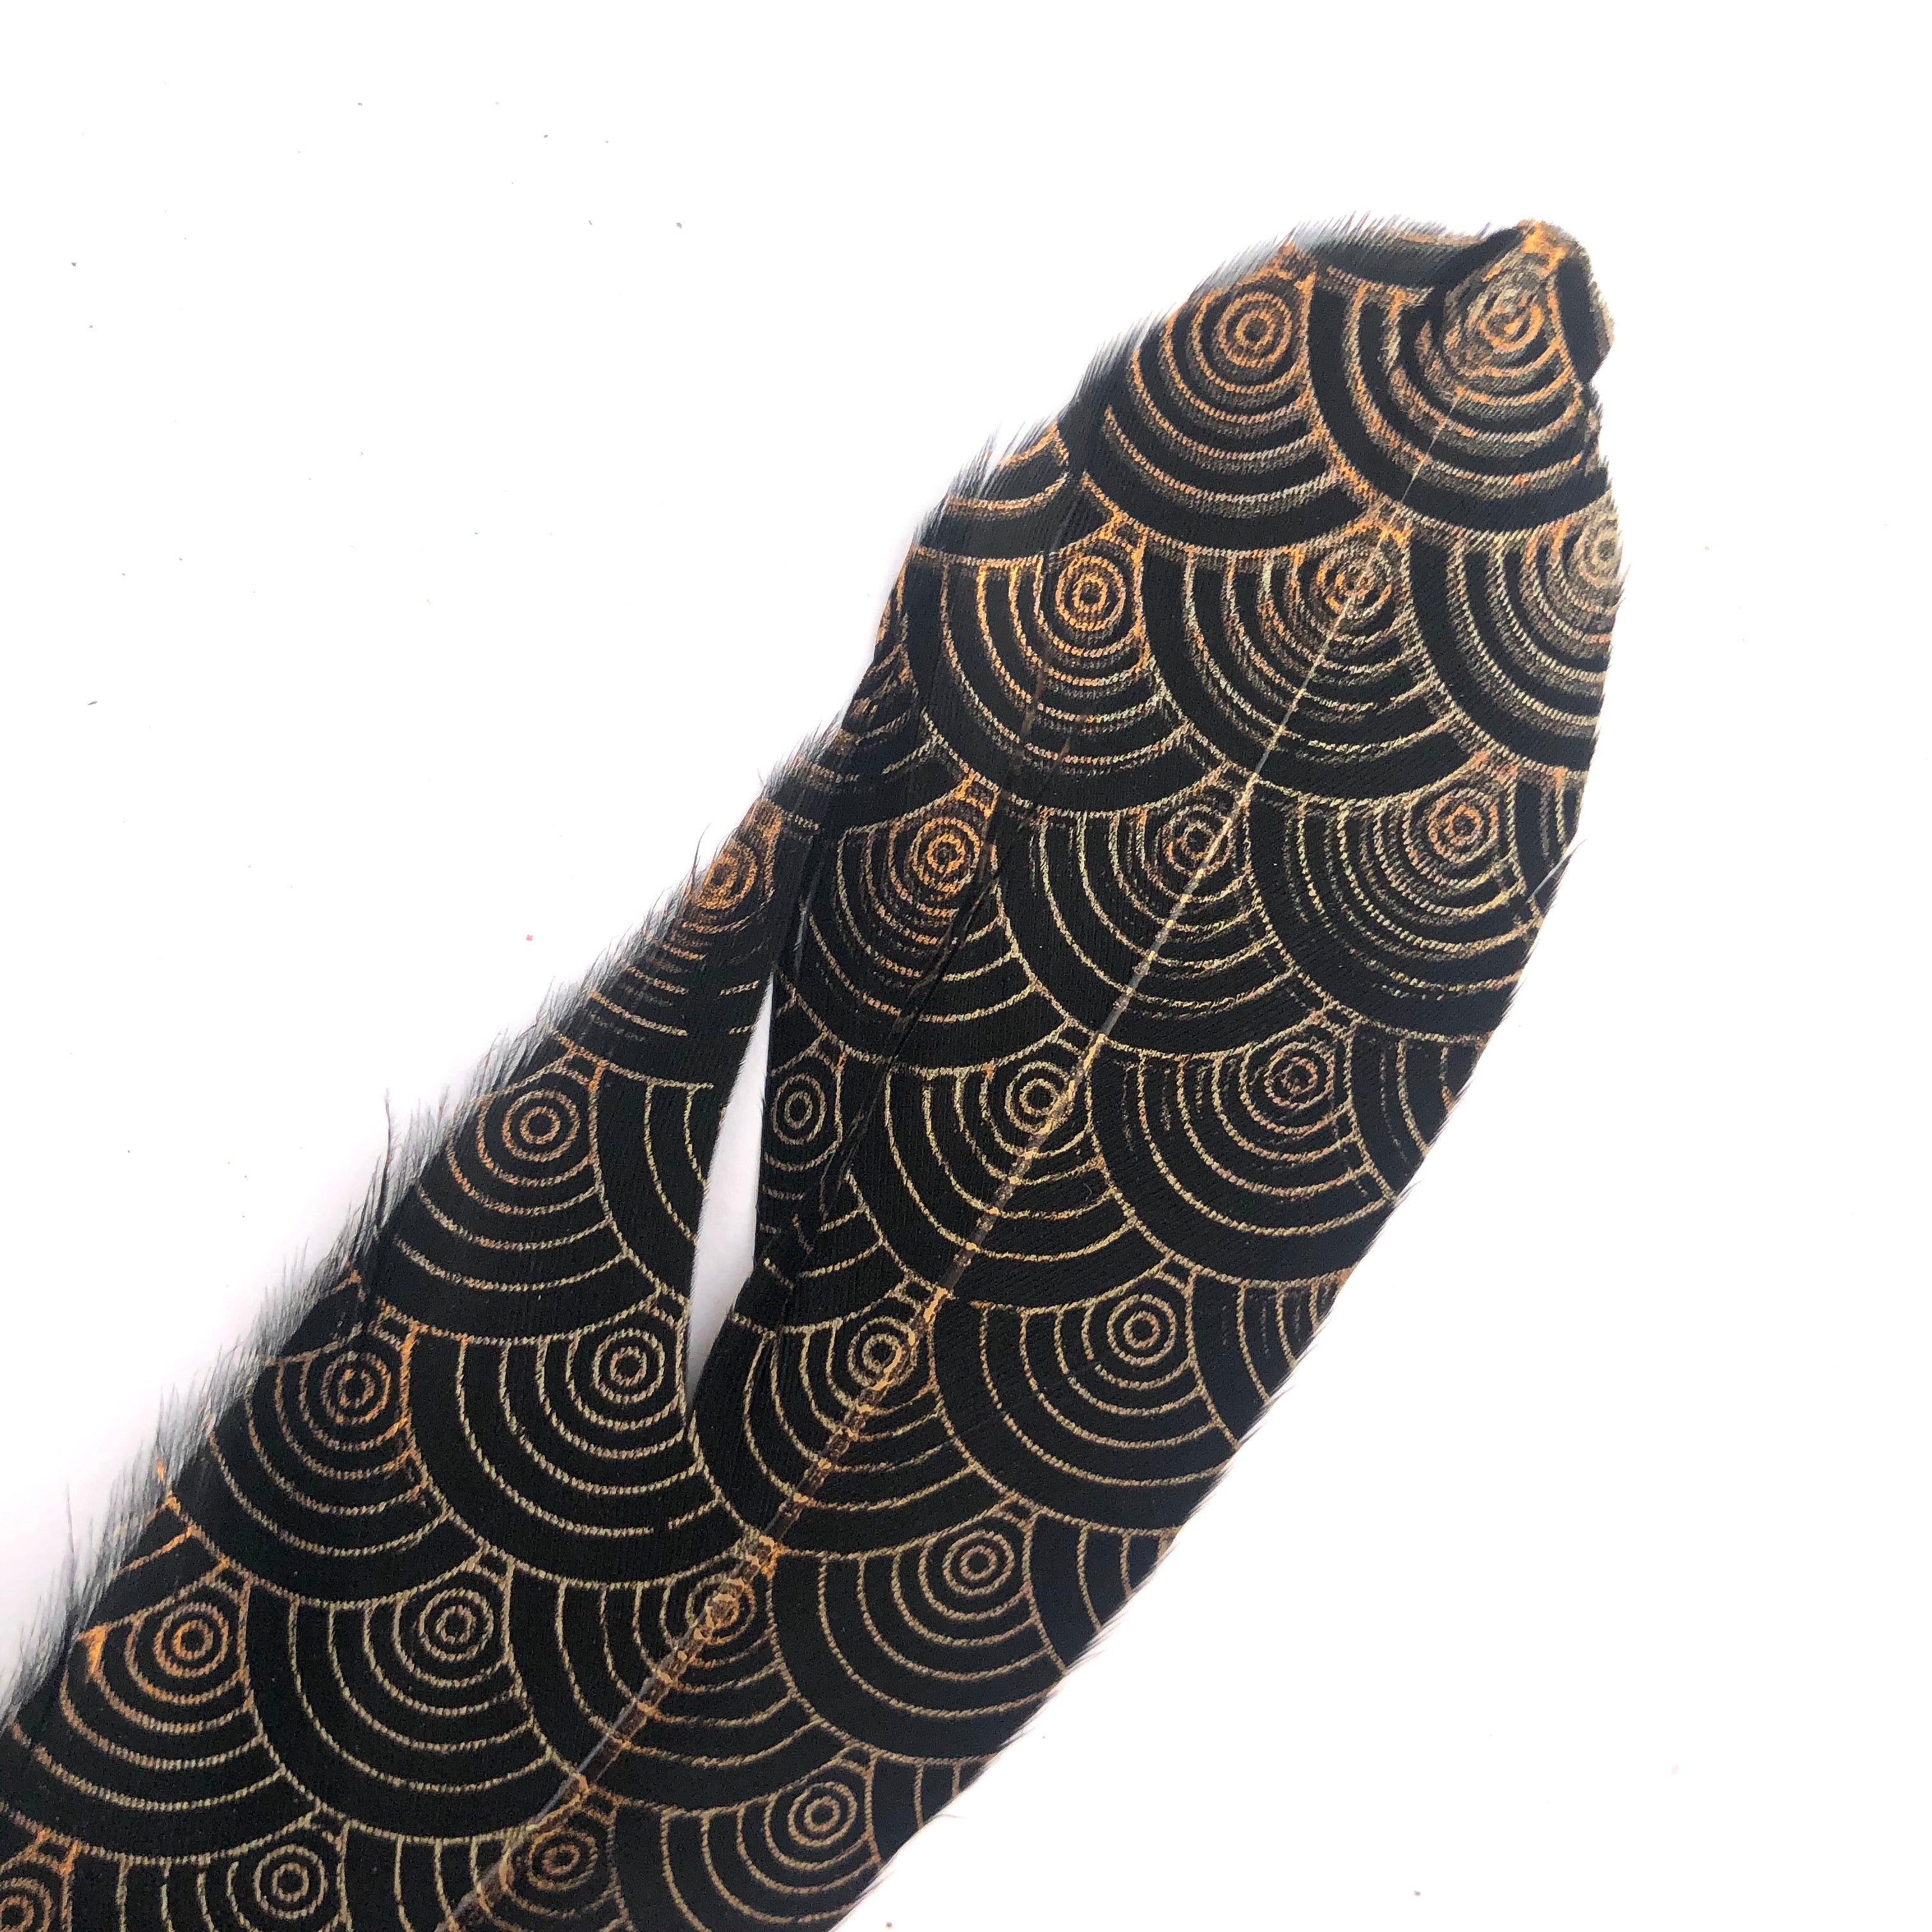 Goose Pointer Printed Black Feather Art Craft - Gold Circles Style 17 x 10 pcs